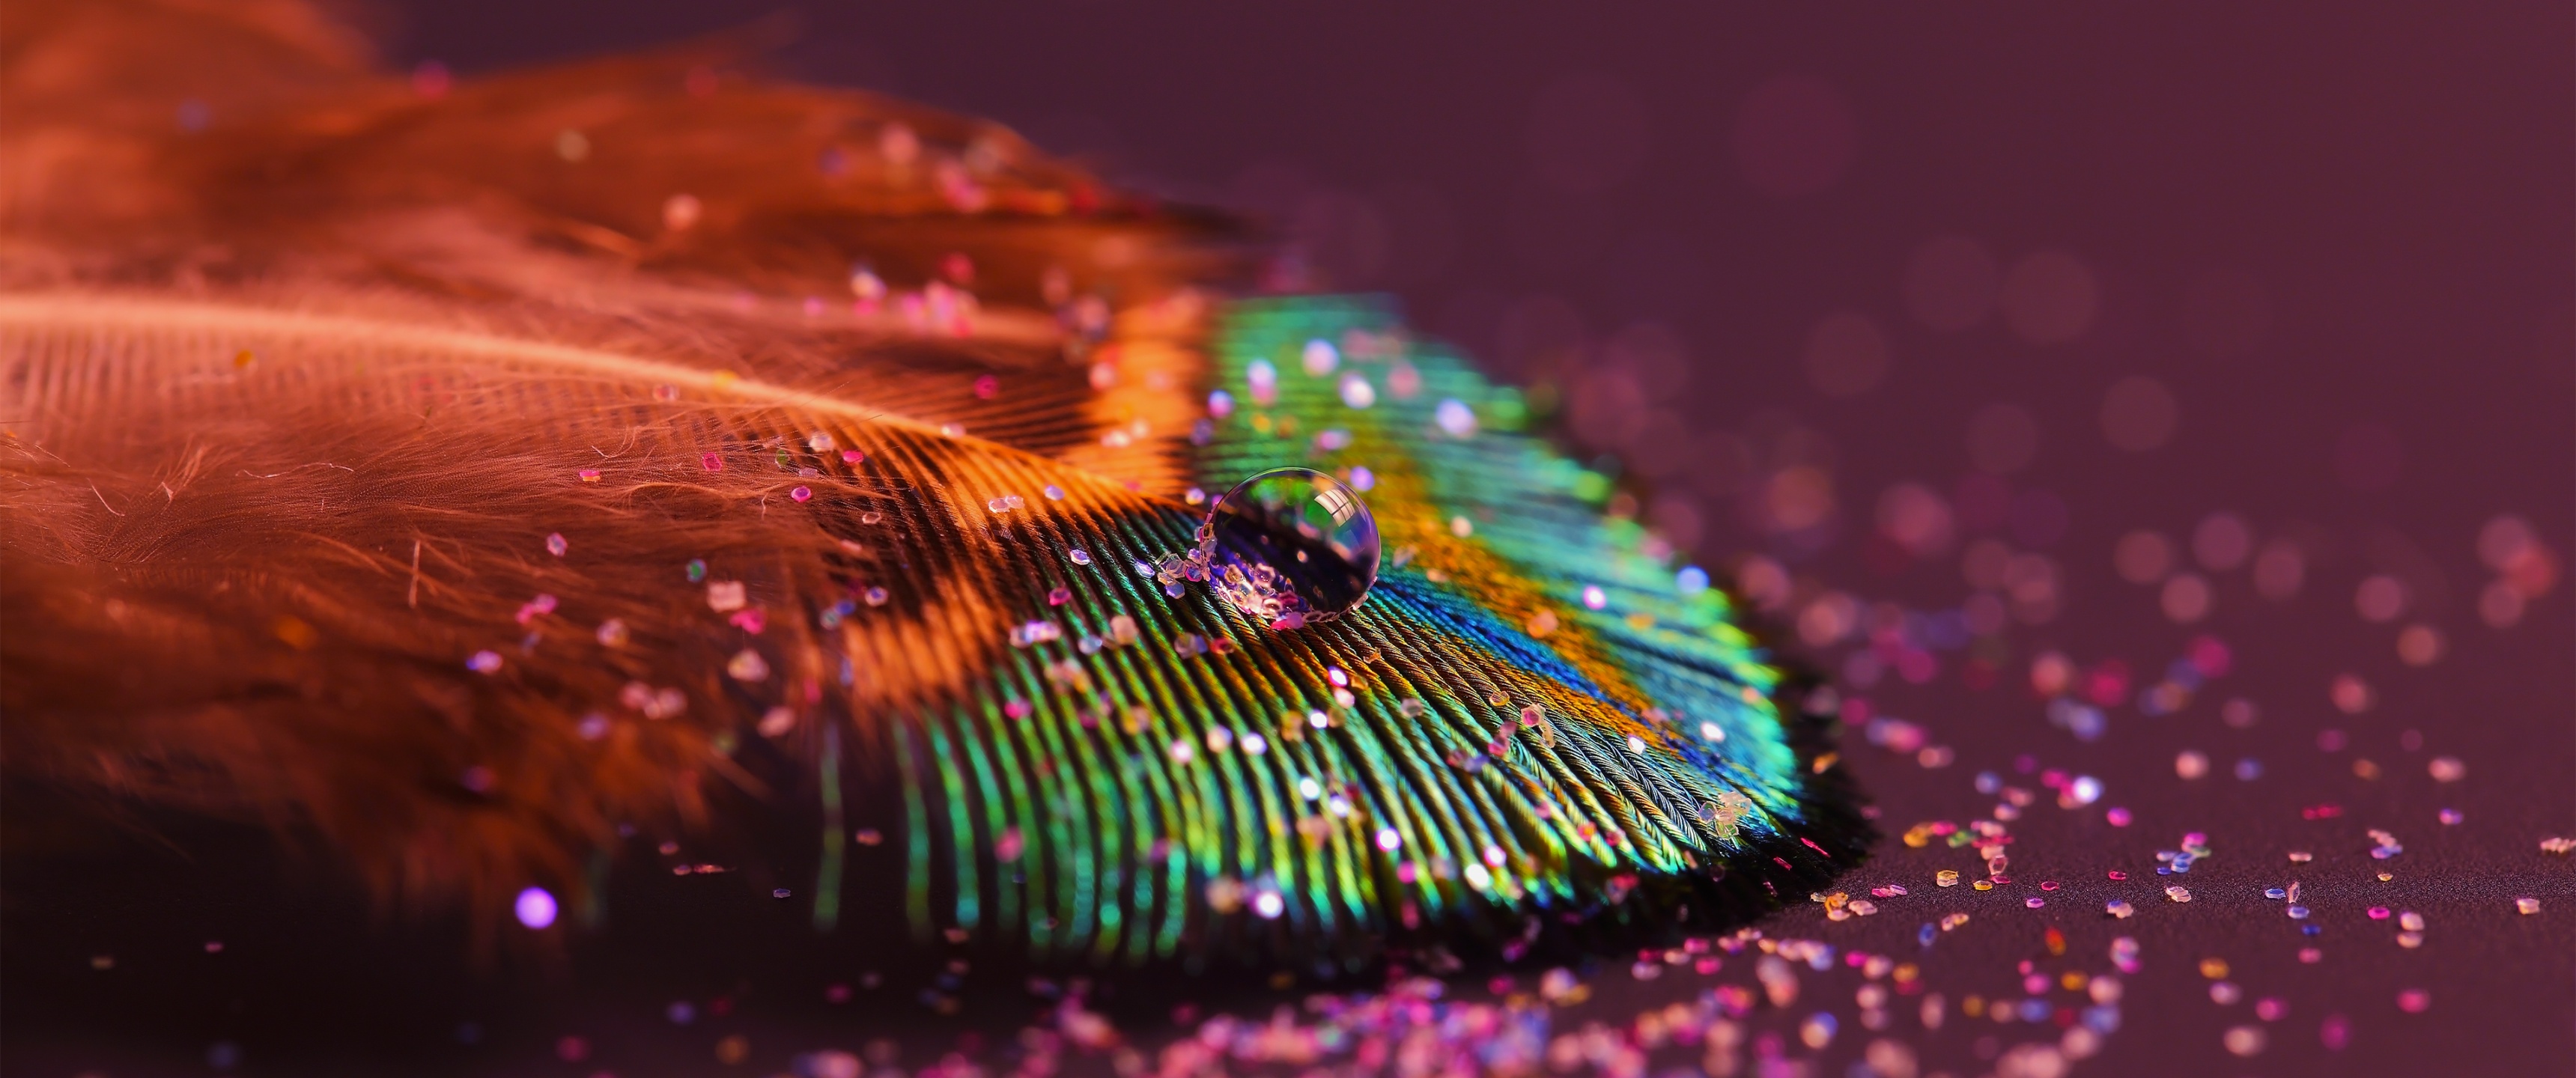 Peacock feather Wallpaper. 